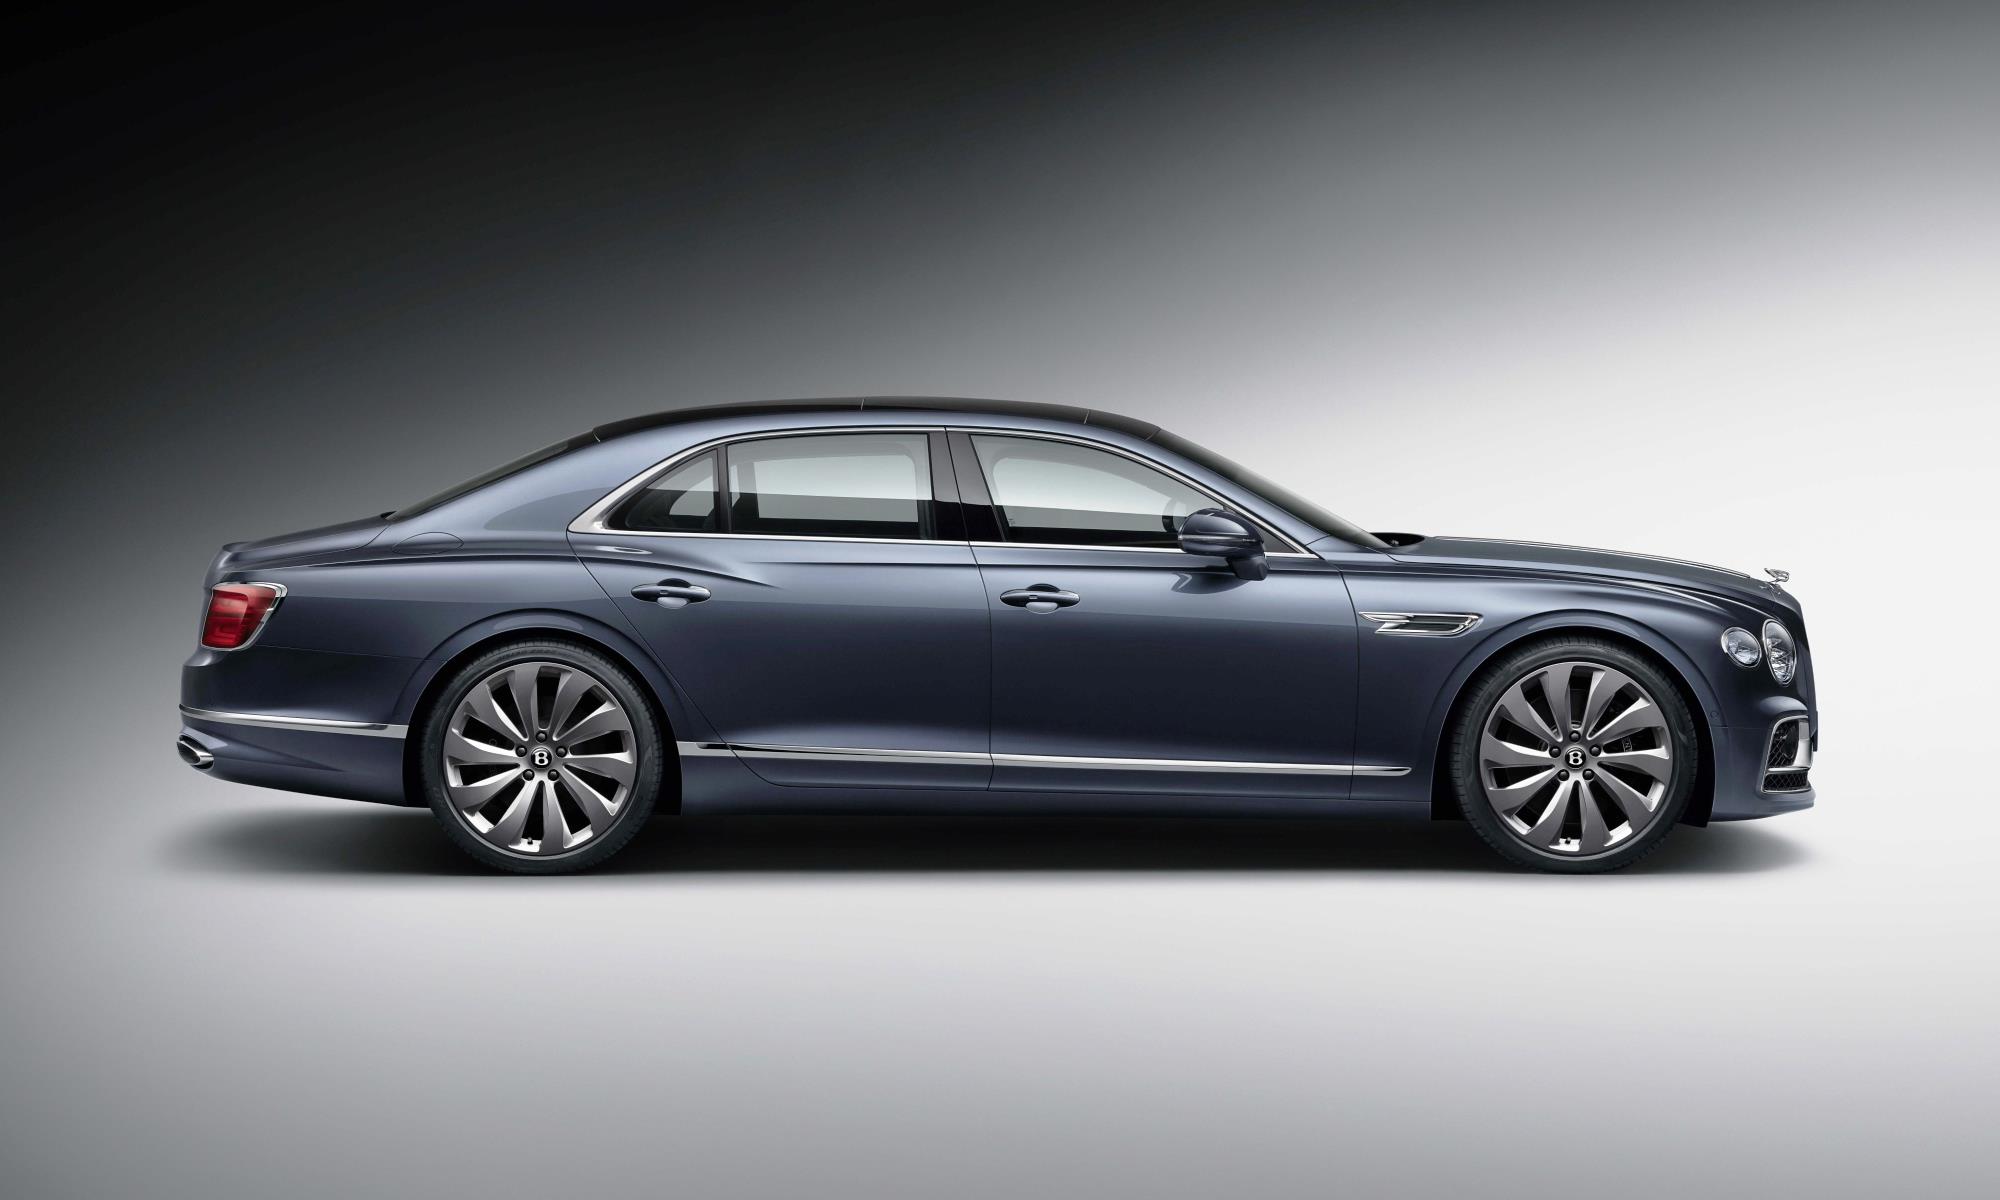 New Bentley Flying Spur profile